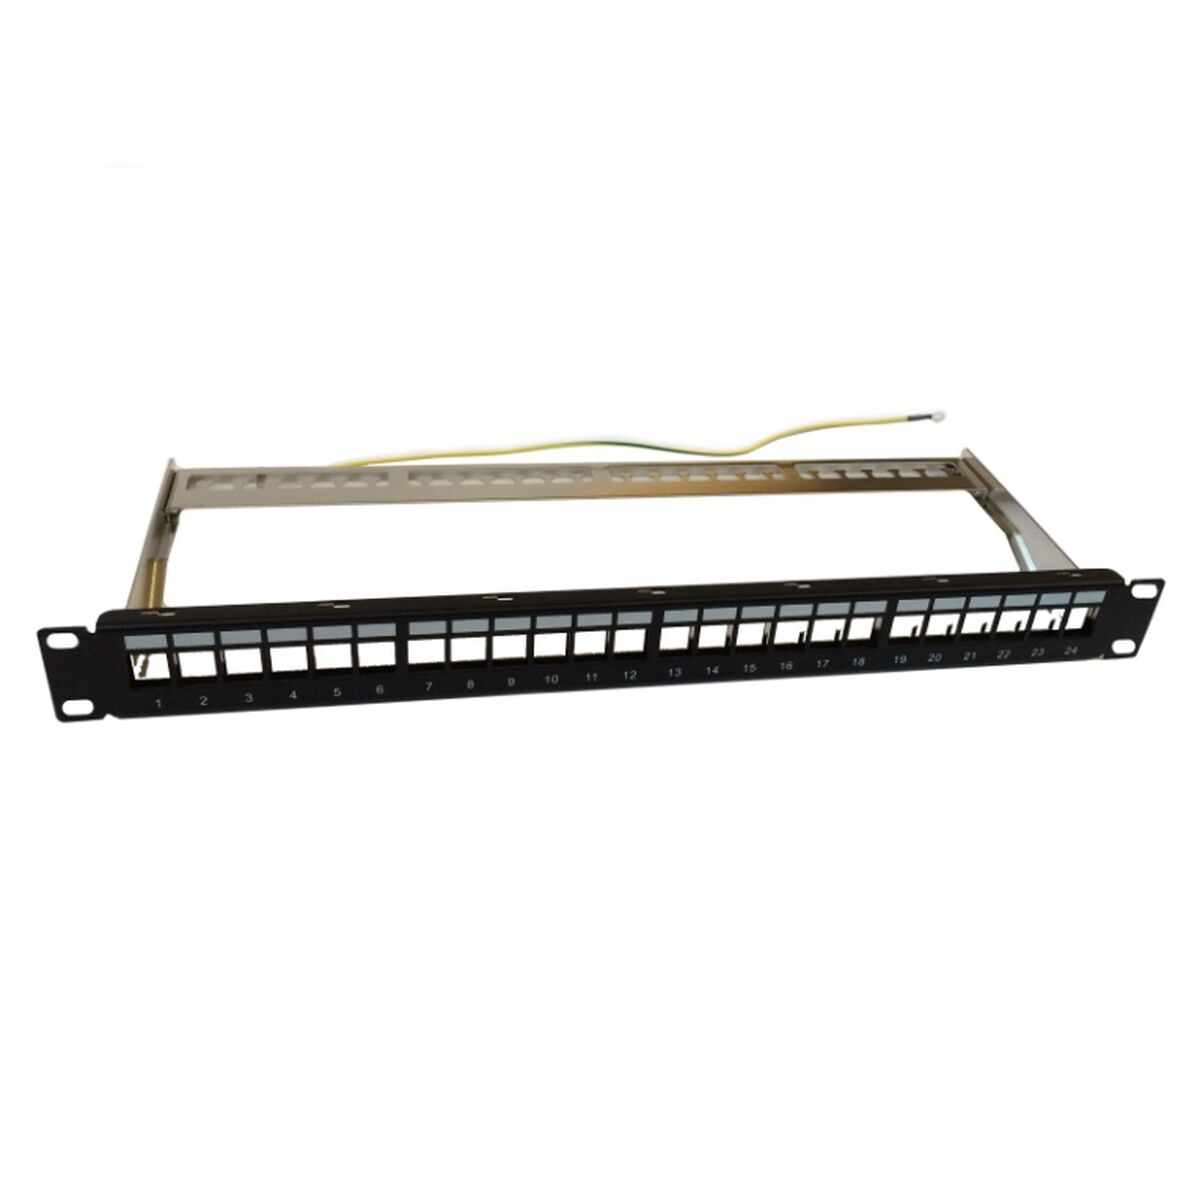 Wall-mounted Rack Cabinet WP WPC-PAN-BF24, WP, Computing, Accessories, wall-mounted-rack-cabinet-wp-wpc-pan-bf24, Brand_WP, category-reference-2609, category-reference-2803, category-reference-2828, category-reference-t-19685, category-reference-t-19908, category-reference-t-21349, Condition_NEW, furniture, networks/wiring, organisation, Price_20 - 50, Teleworking, RiotNook